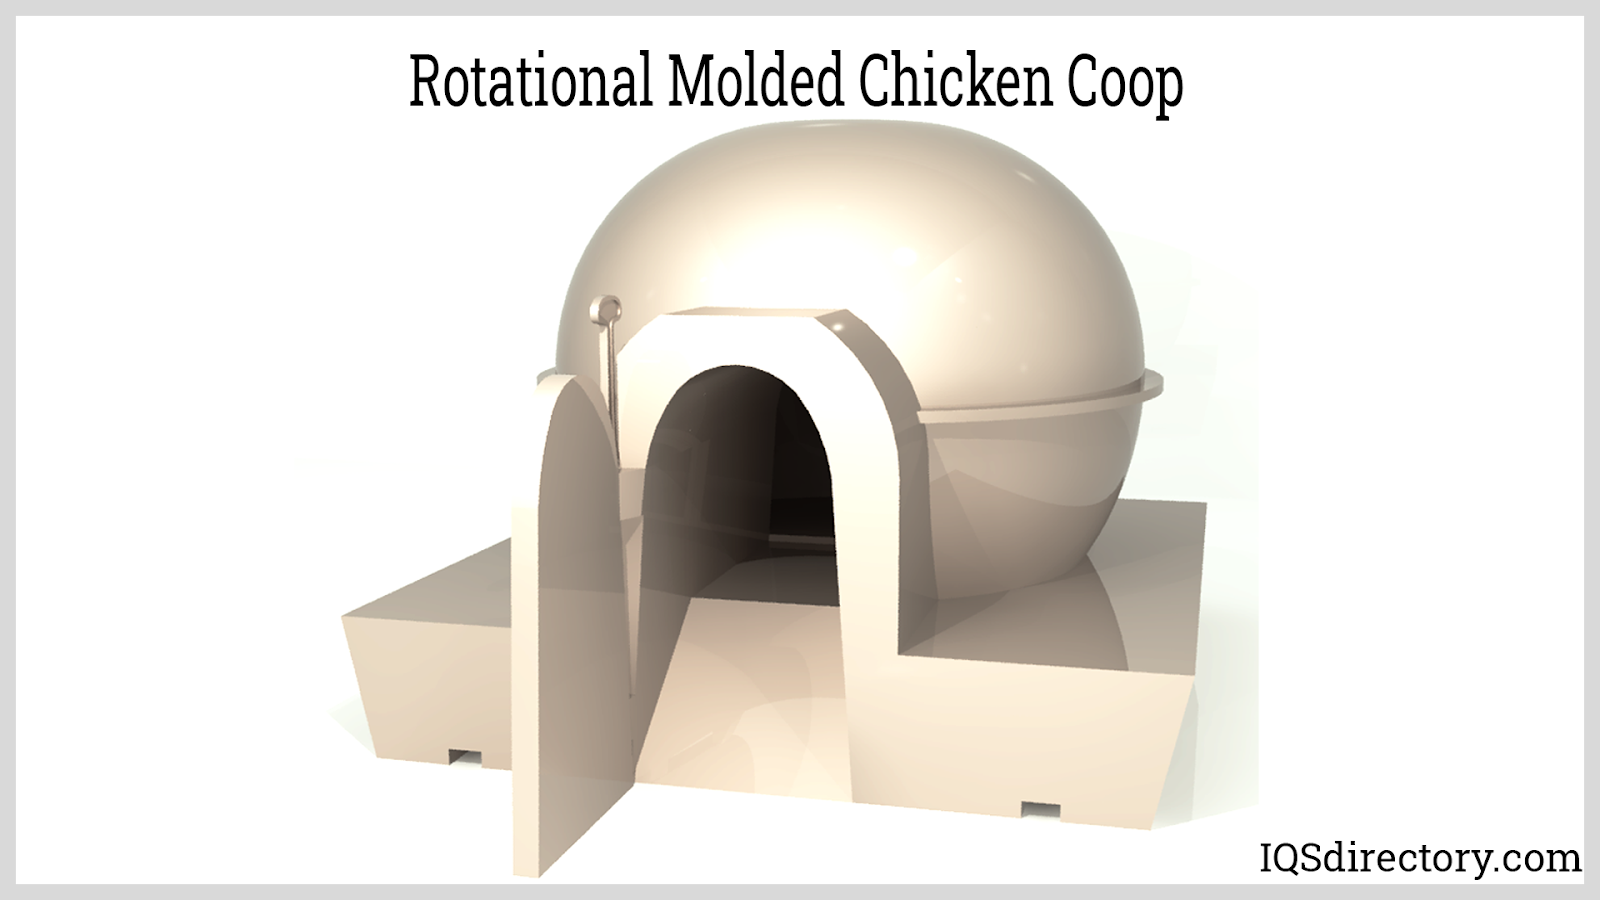 Rotational Molded Chicken Coop